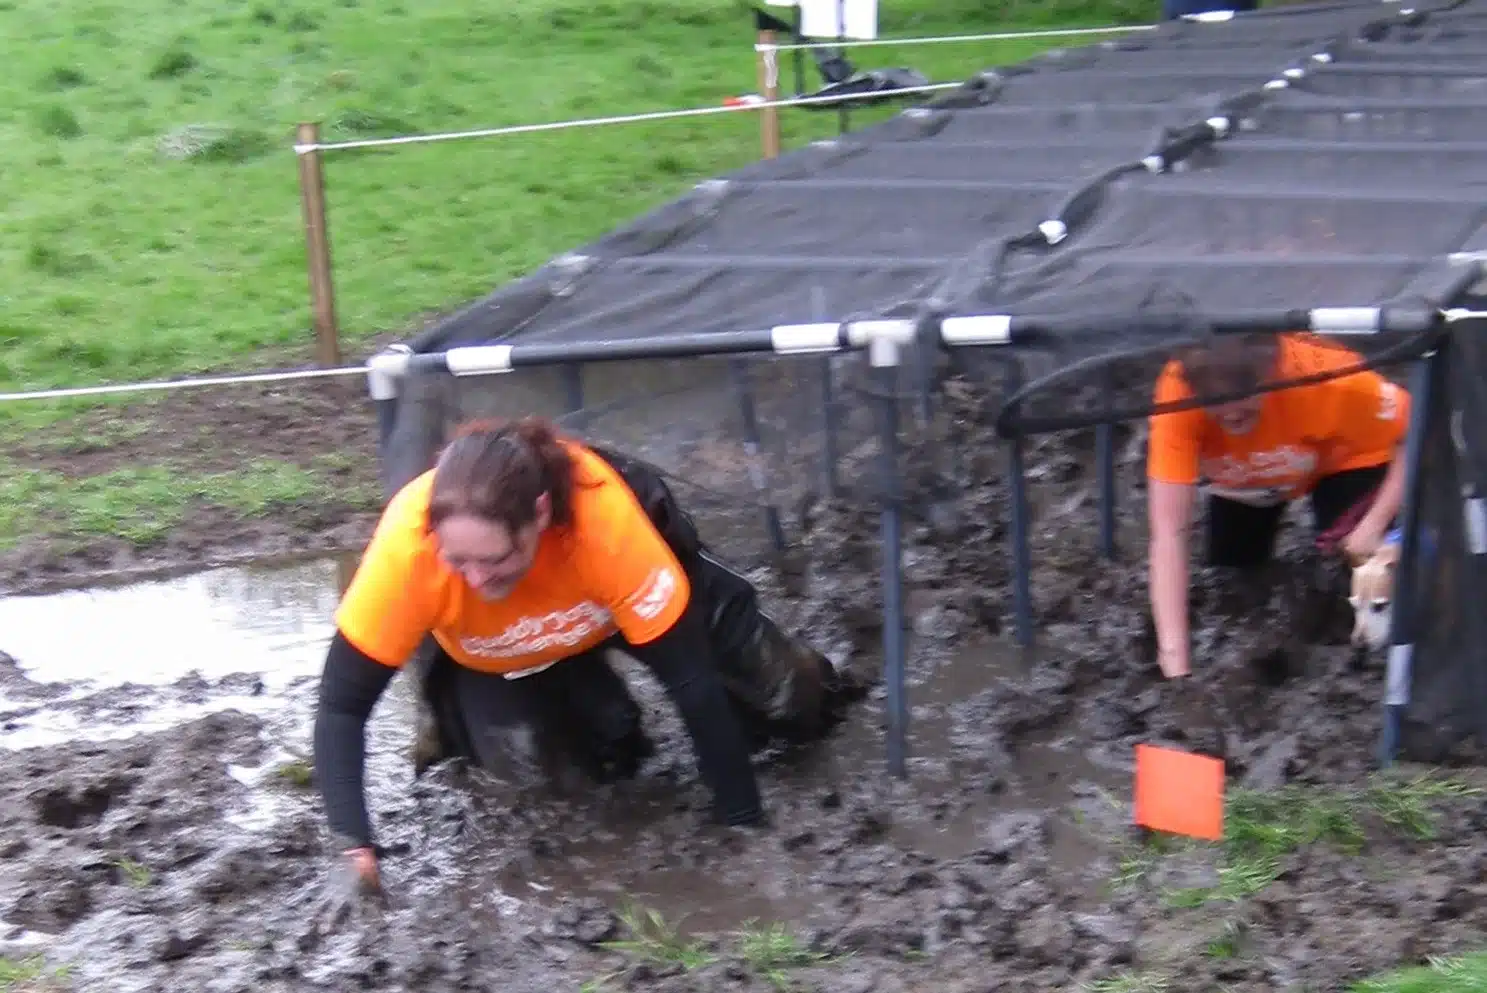 What it's like at the Battersea Muddy Dog challenge